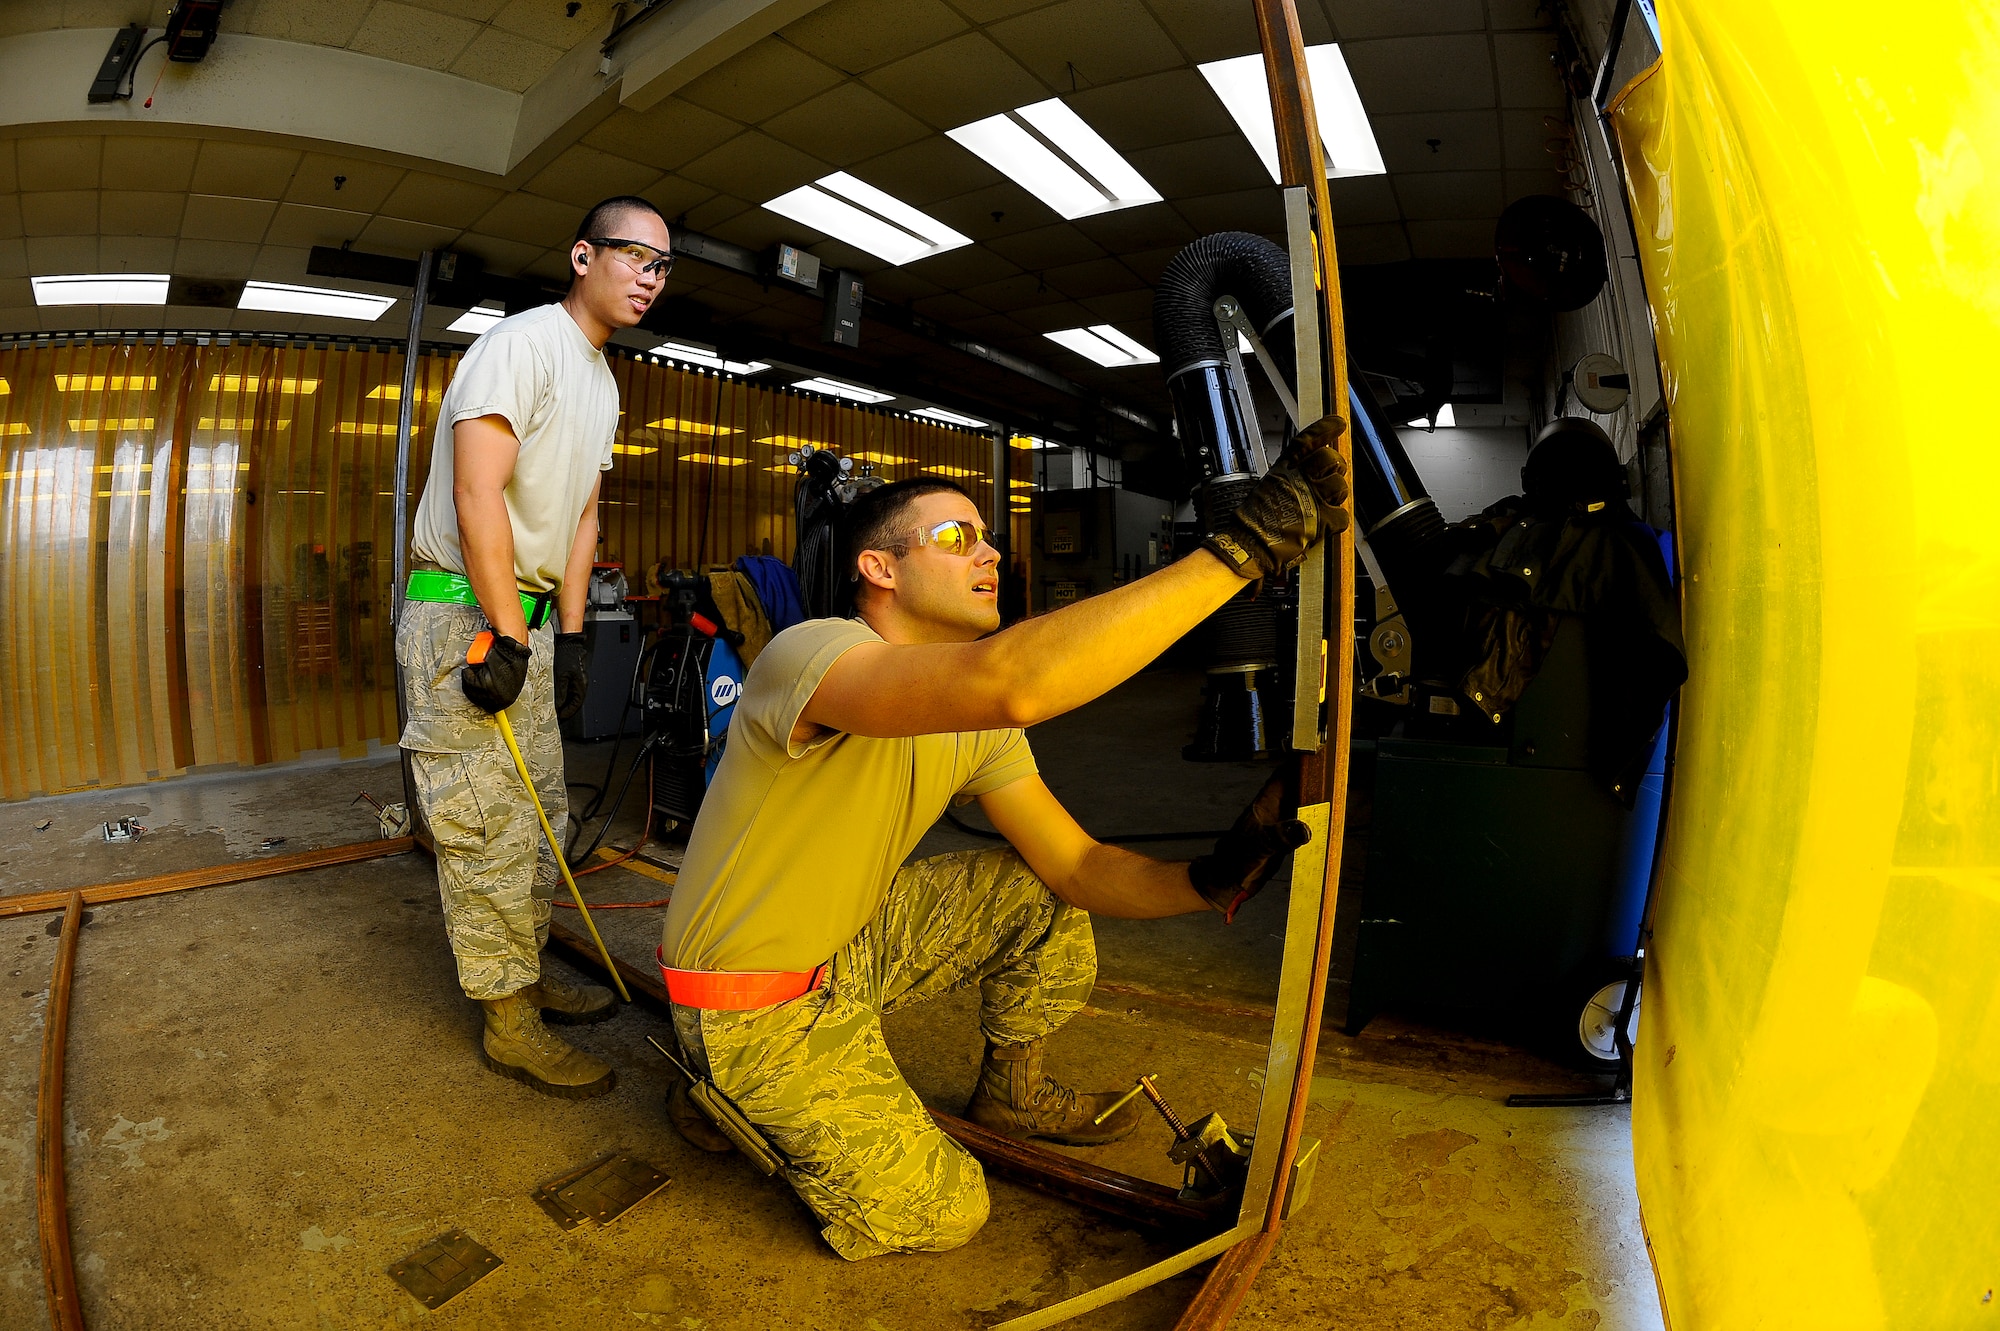 Staff Sgt. Armand Guting, left, and Senior Airman Andrew Flanagan, right, aircraft metals technology technicians with the 6th Maintenance Squadron, measure to find the location for a support beam on the paint rack at MacDill Air Force Base, Fla., May 20, 2016. Once the rack is complete, it will function like a clothing rack and have parts hanging off the framed roof. (U.S. Air Force photo by Airman 1st Class Mariette Adams)